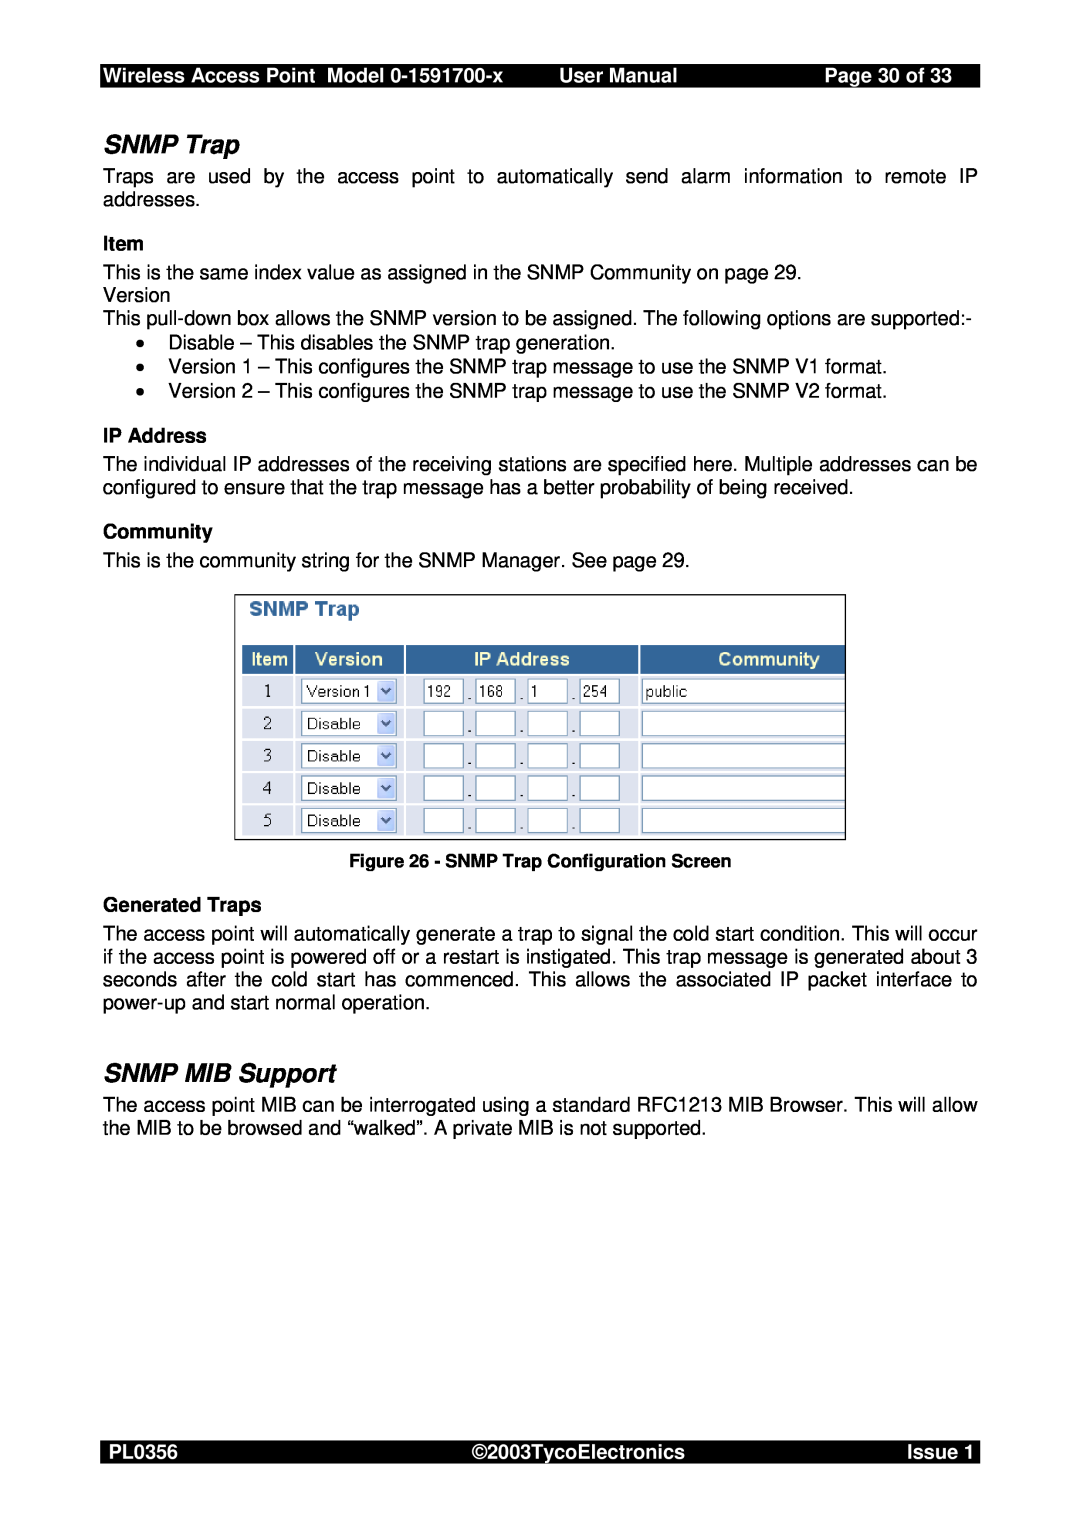 Tyco 0-1591700-x SNMP Trap, SNMP MIB Support, Page 30 of, Wireless Access Point Model, User Manual, PL0356, Issue 